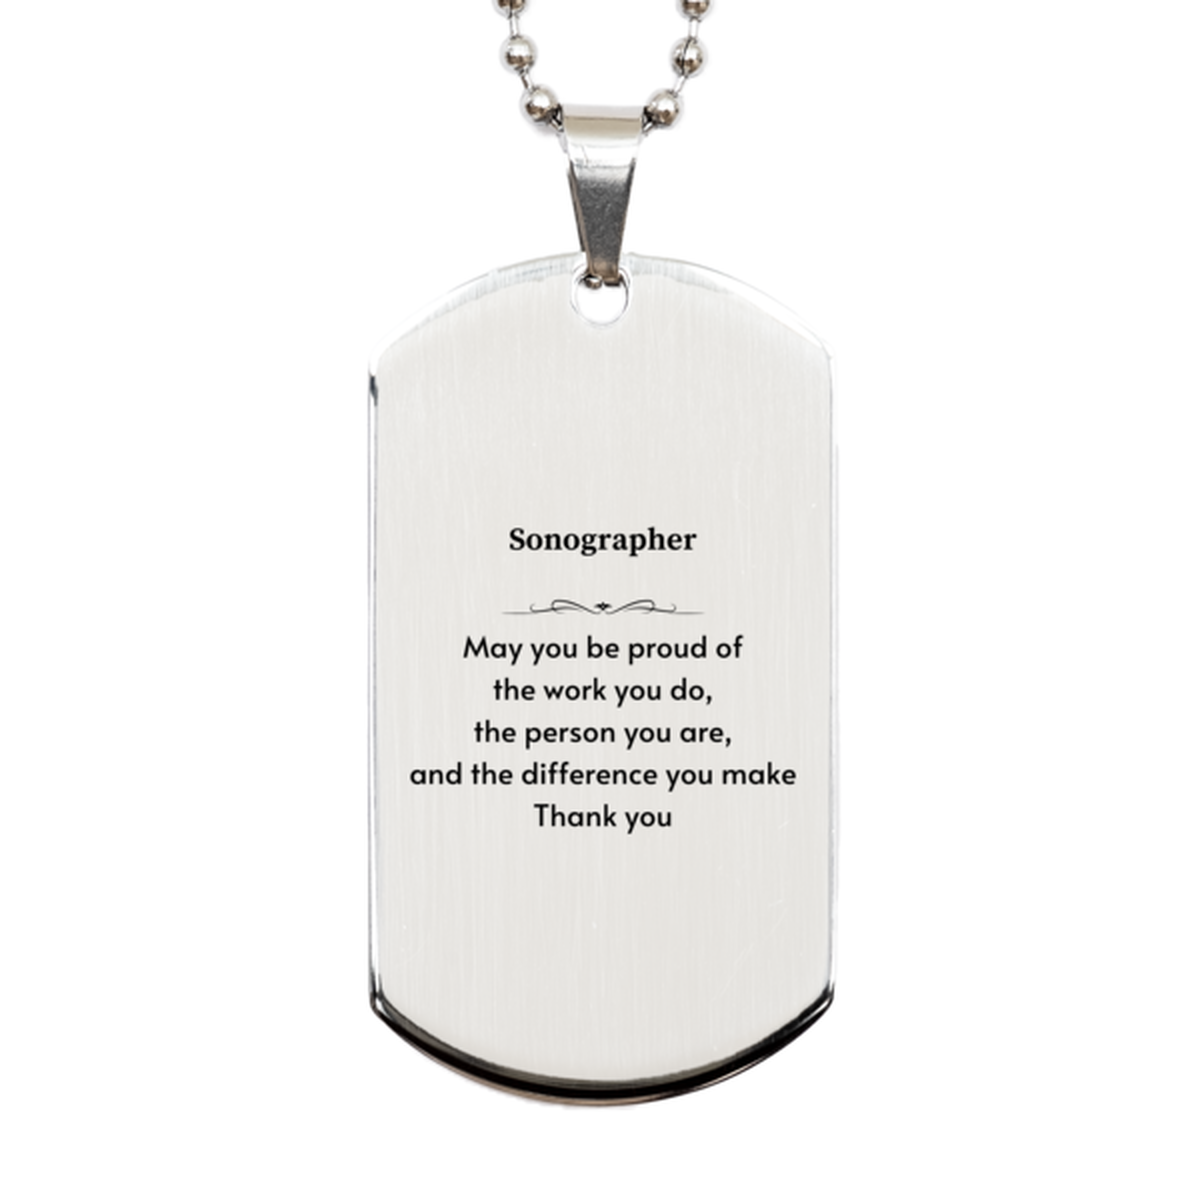 Heartwarming Silver Dog Tag Retirement Coworkers Gifts for Sonographer, Sonographer May You be proud of the work you do, the person you are Gifts for Boss Men Women Friends